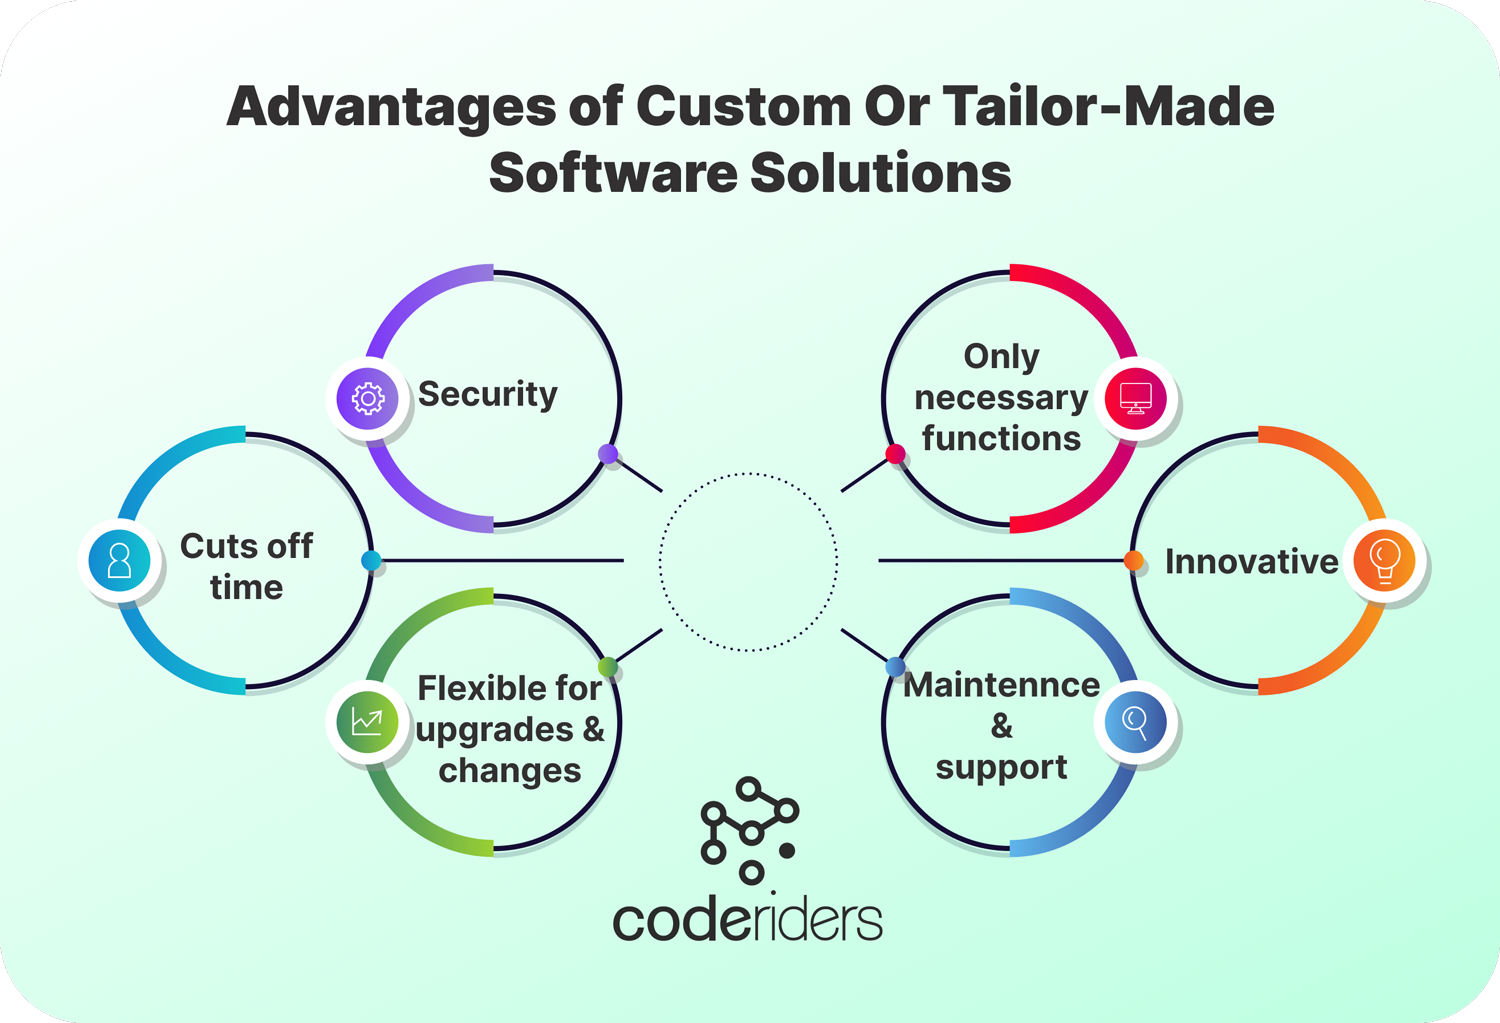 The advantages of tailor made software solutions include their simplicity, high level customization, one time payment for custom software development services etc